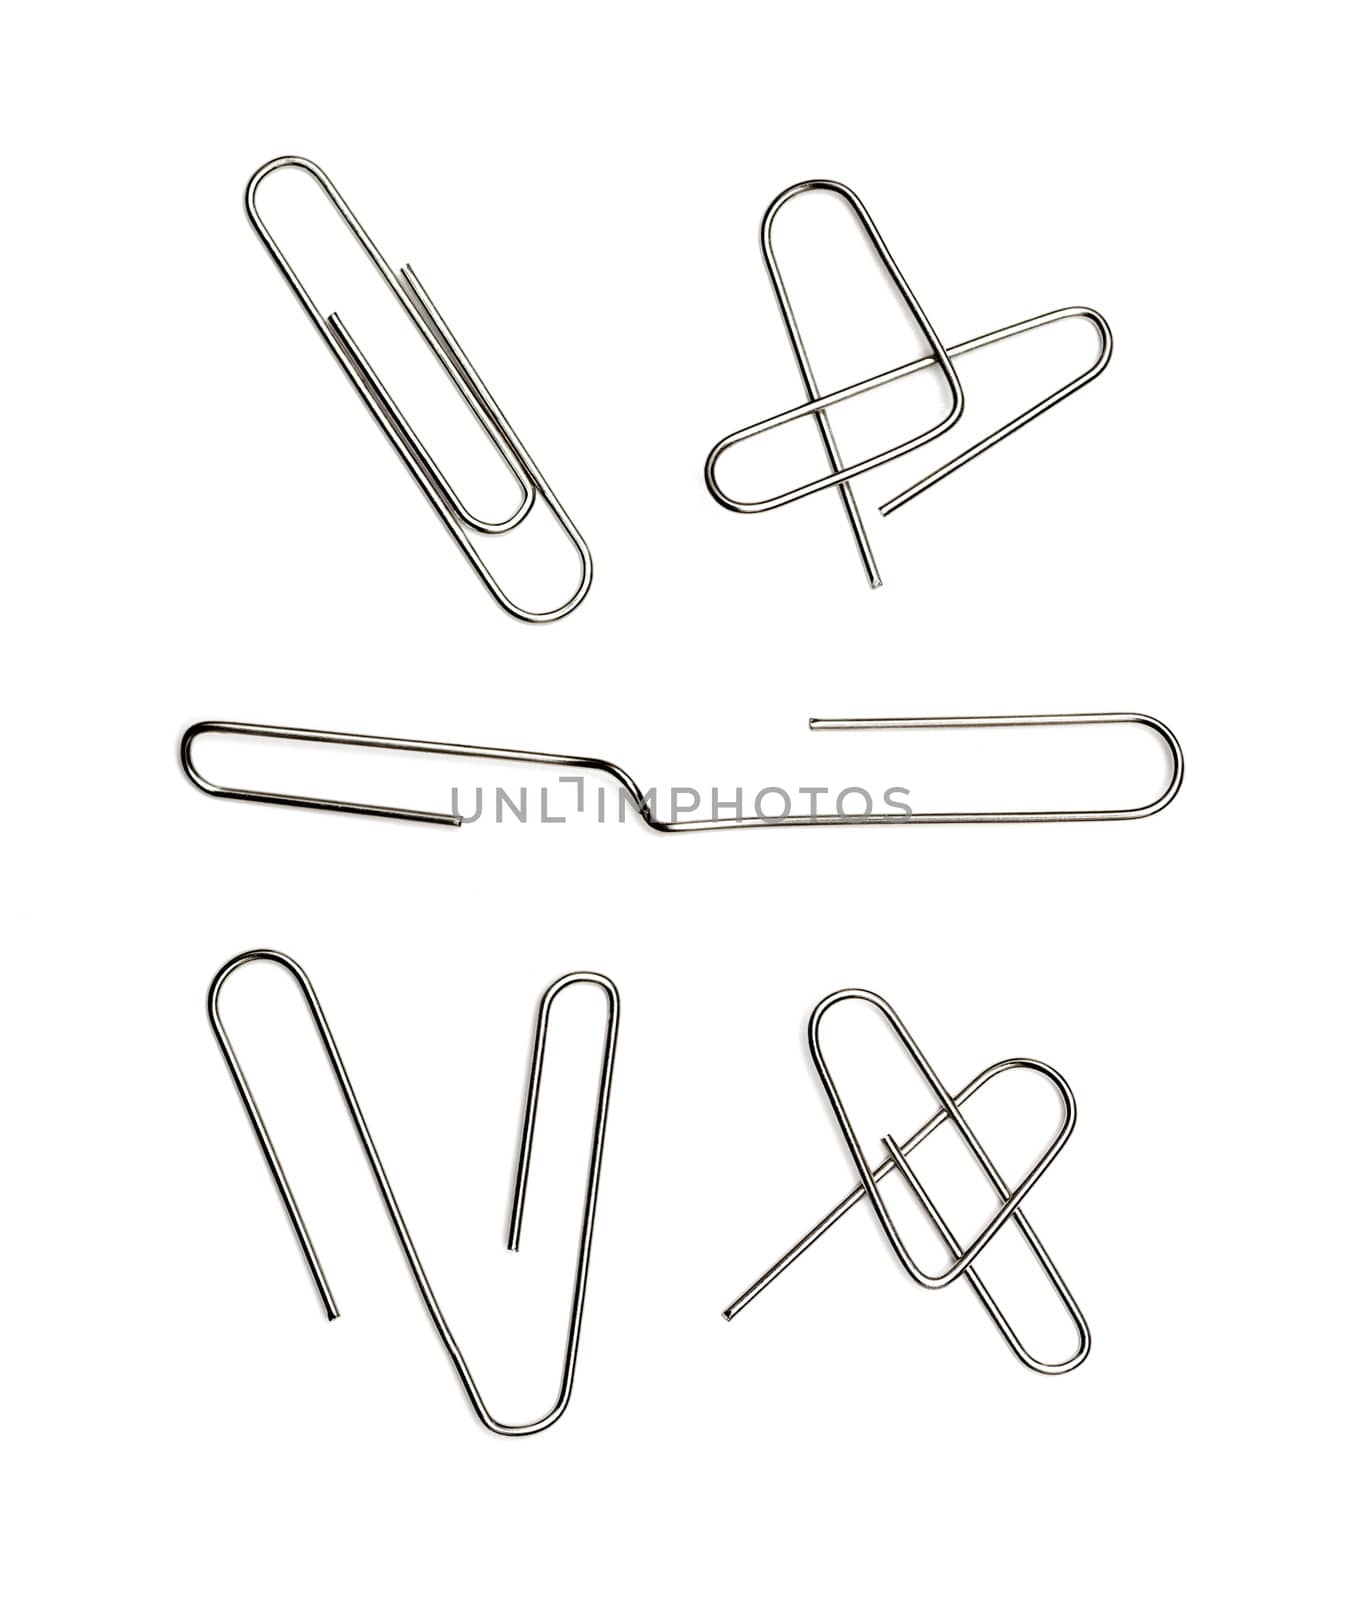 Set of paper clips in different angles, isolated on white background